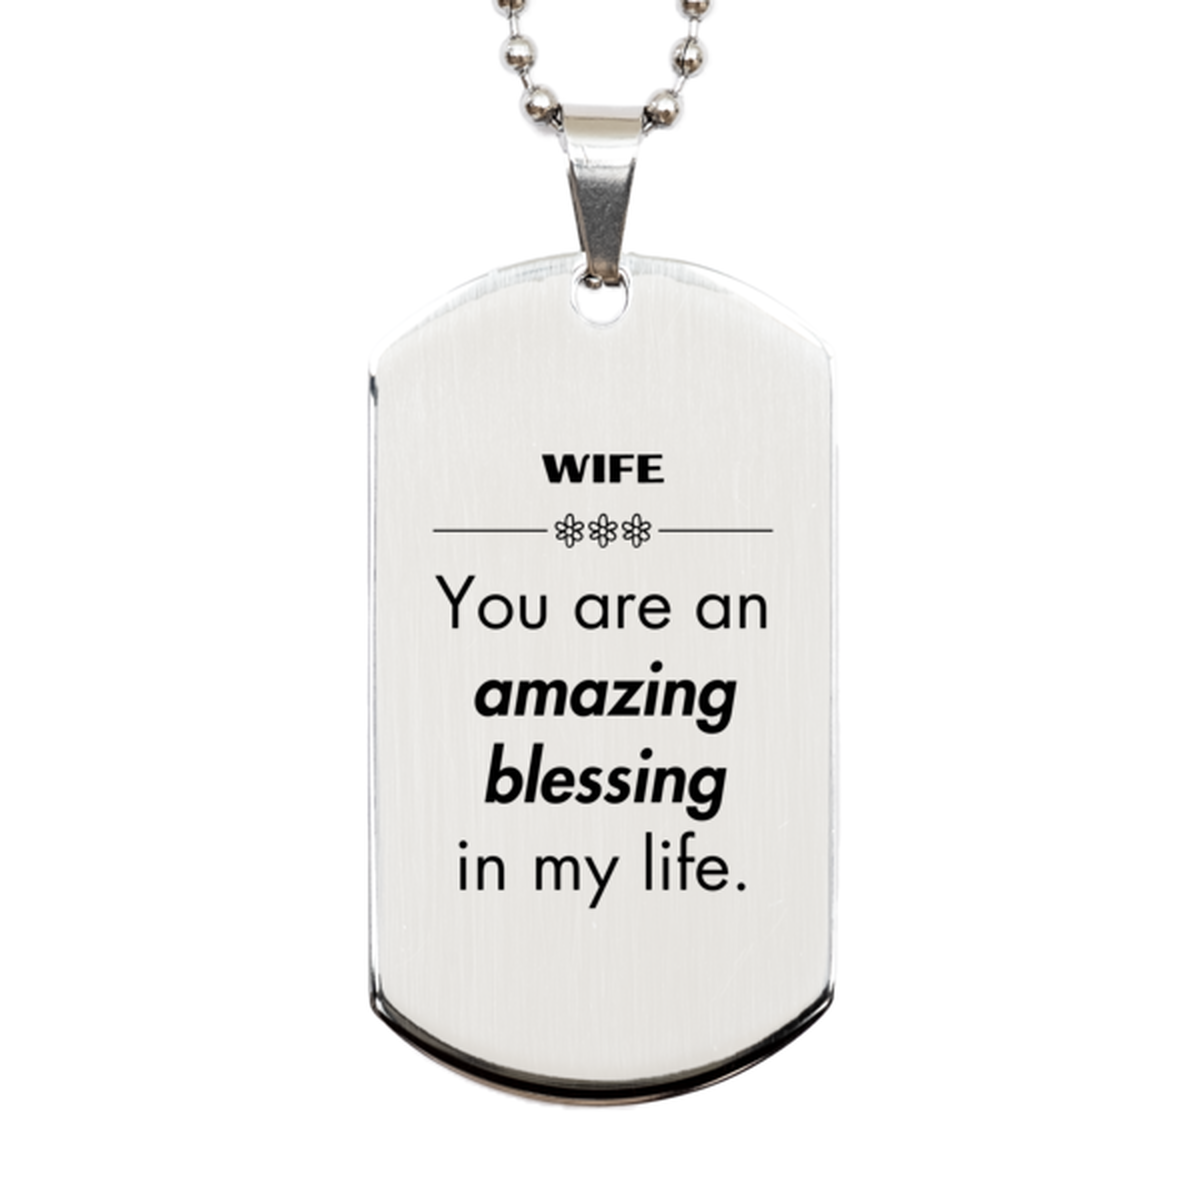 Wife Silver Dog Tag, You are an amazing blessing in my life, Thank You Gifts For Wife, Inspirational Birthday Christmas Unique Gifts For Wife